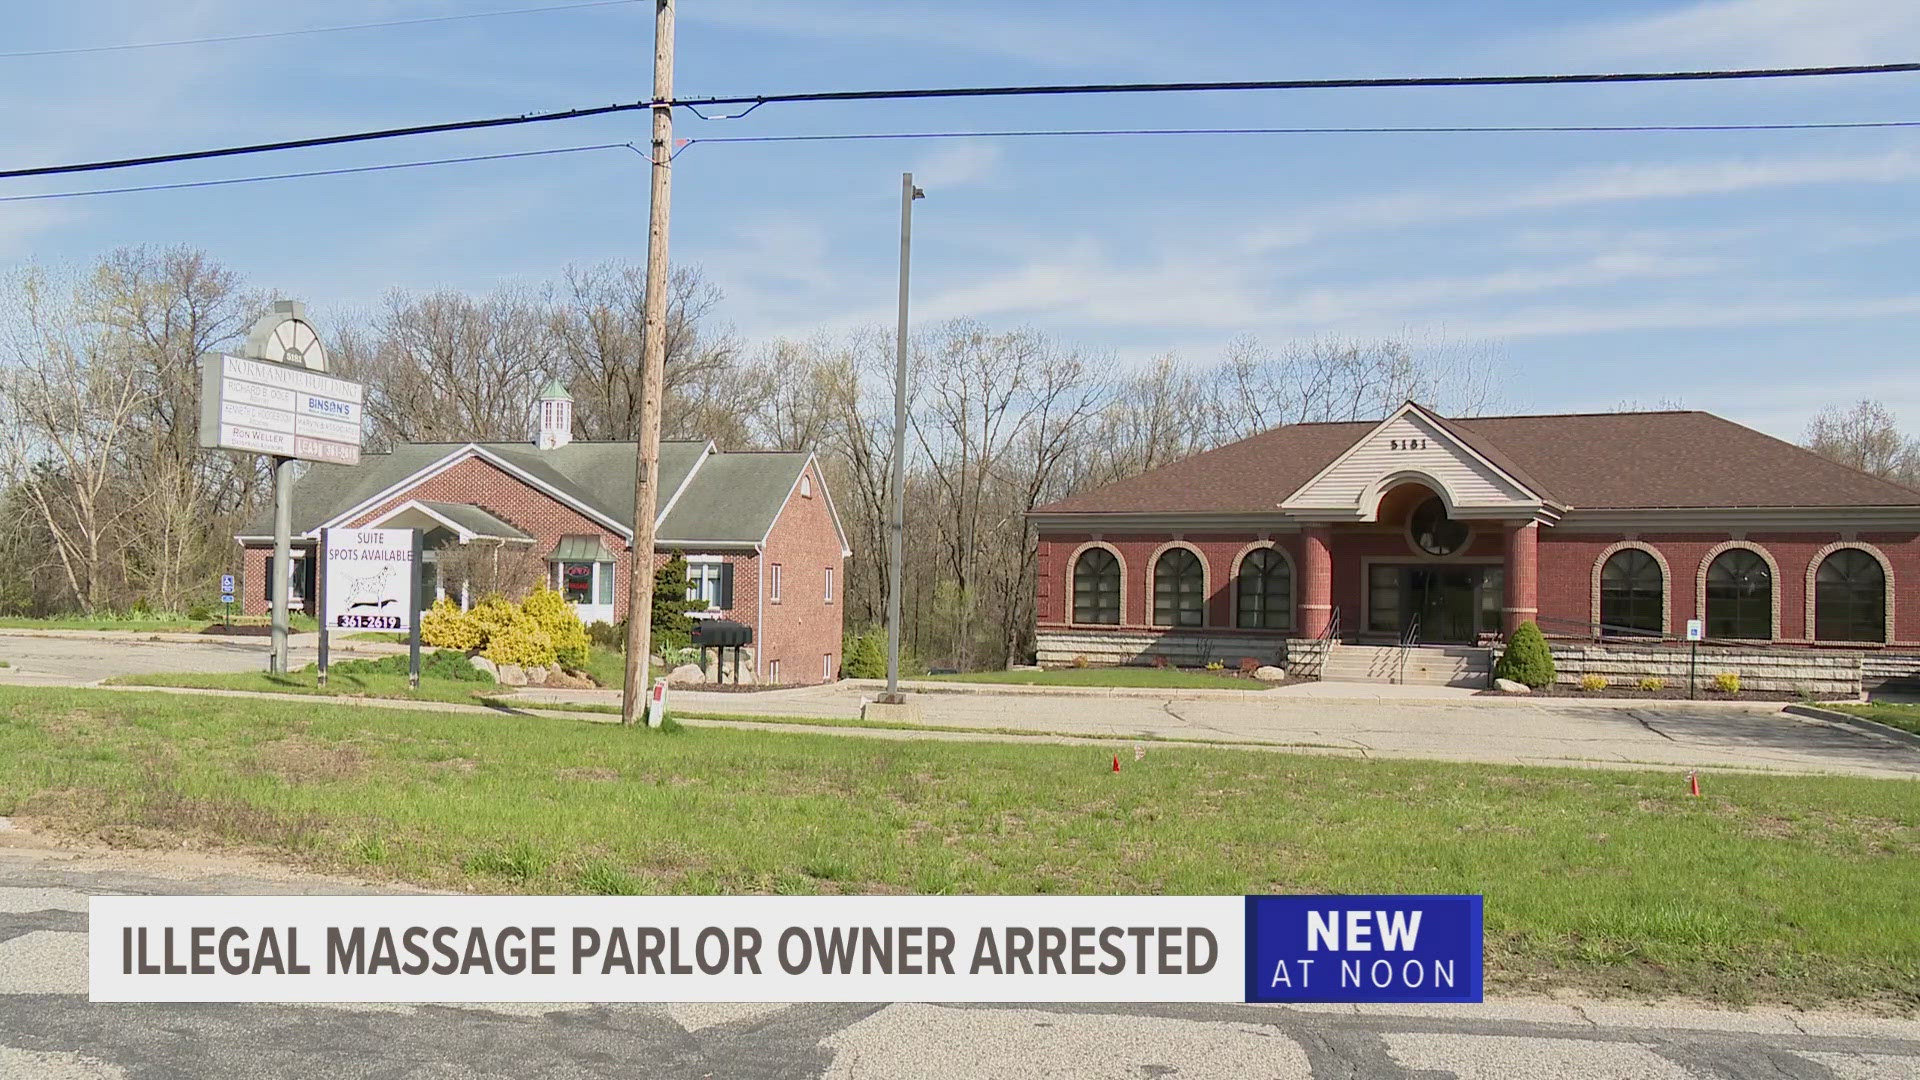 The parlor, which was the most attended massage parlor in the county, had mostly male clients that came from all across the state, investigators say.